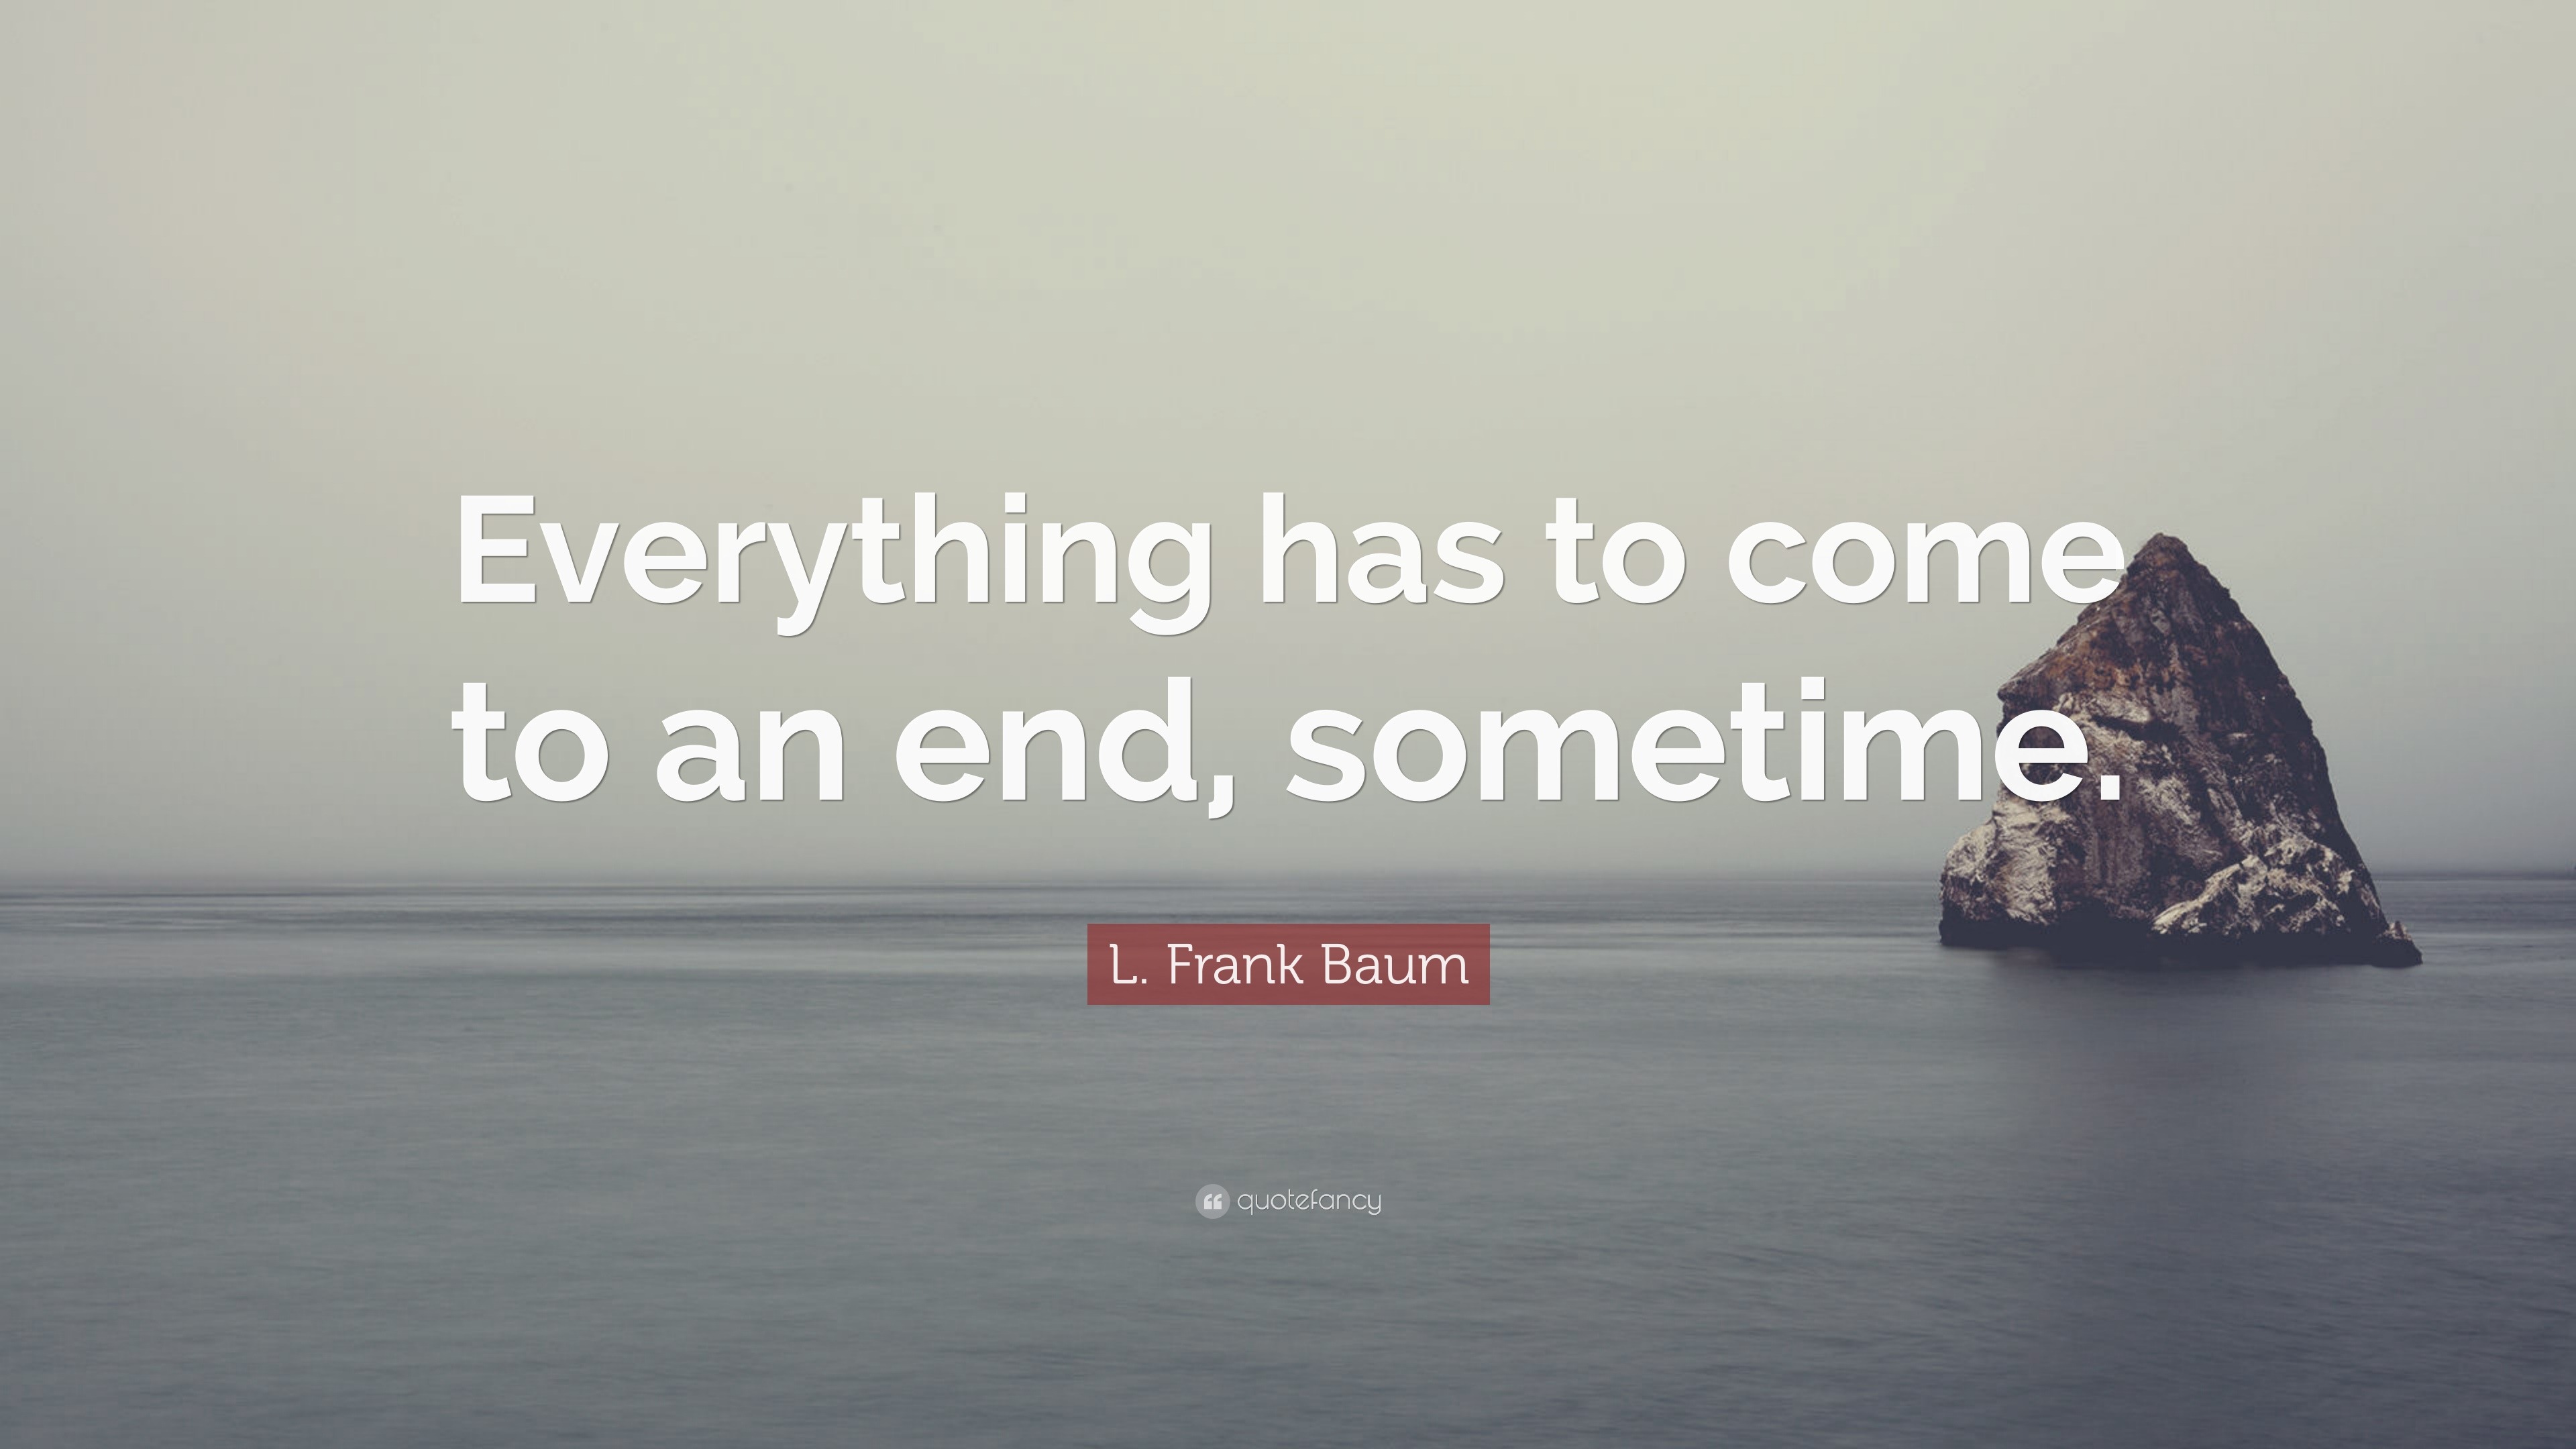 L. Frank Baum Quote: “Everything has to come to an end, sometime.”